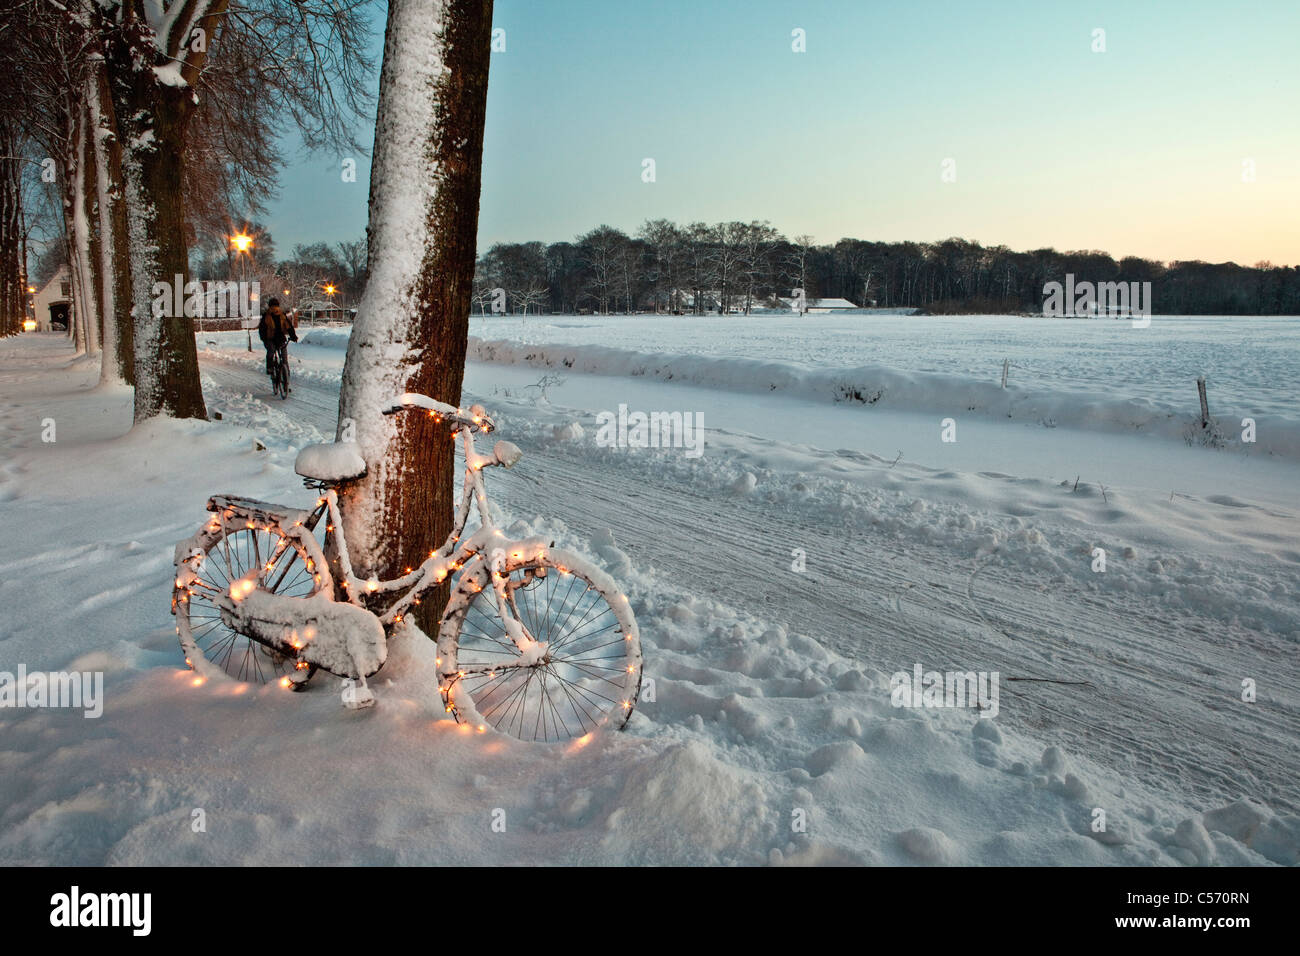 The Netherlands, 's-Graveland, bicycle decorated with Christmas lights in snow. Woman cycling. Stock Photo